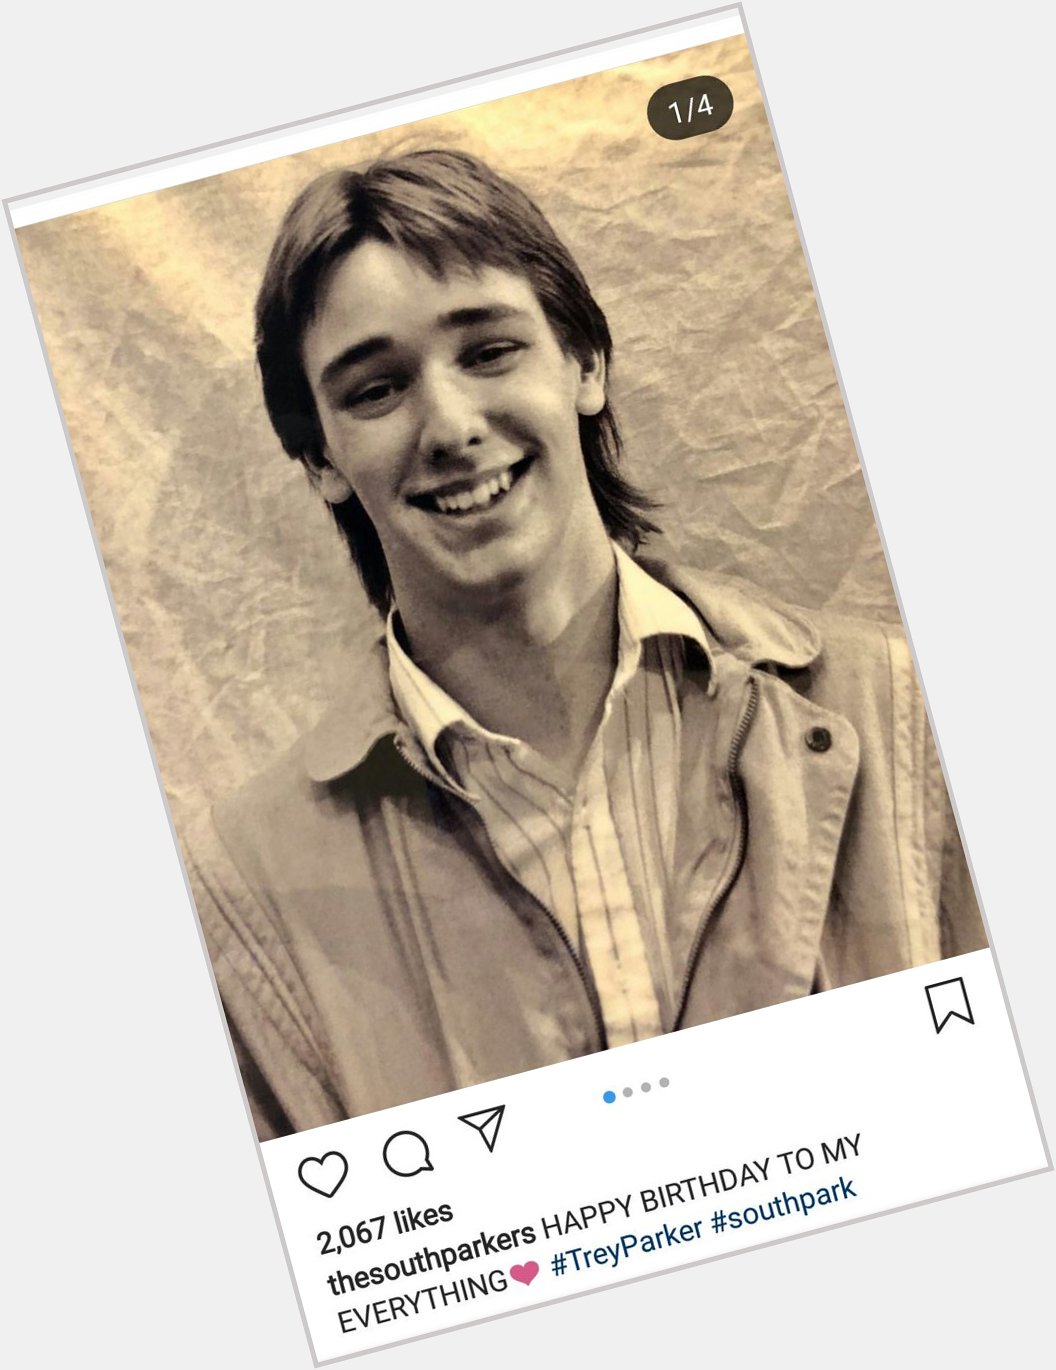 Boogie Parker shared old picture of Trey Parker. Happy Birthday Trey Parker! (Link in comment) 